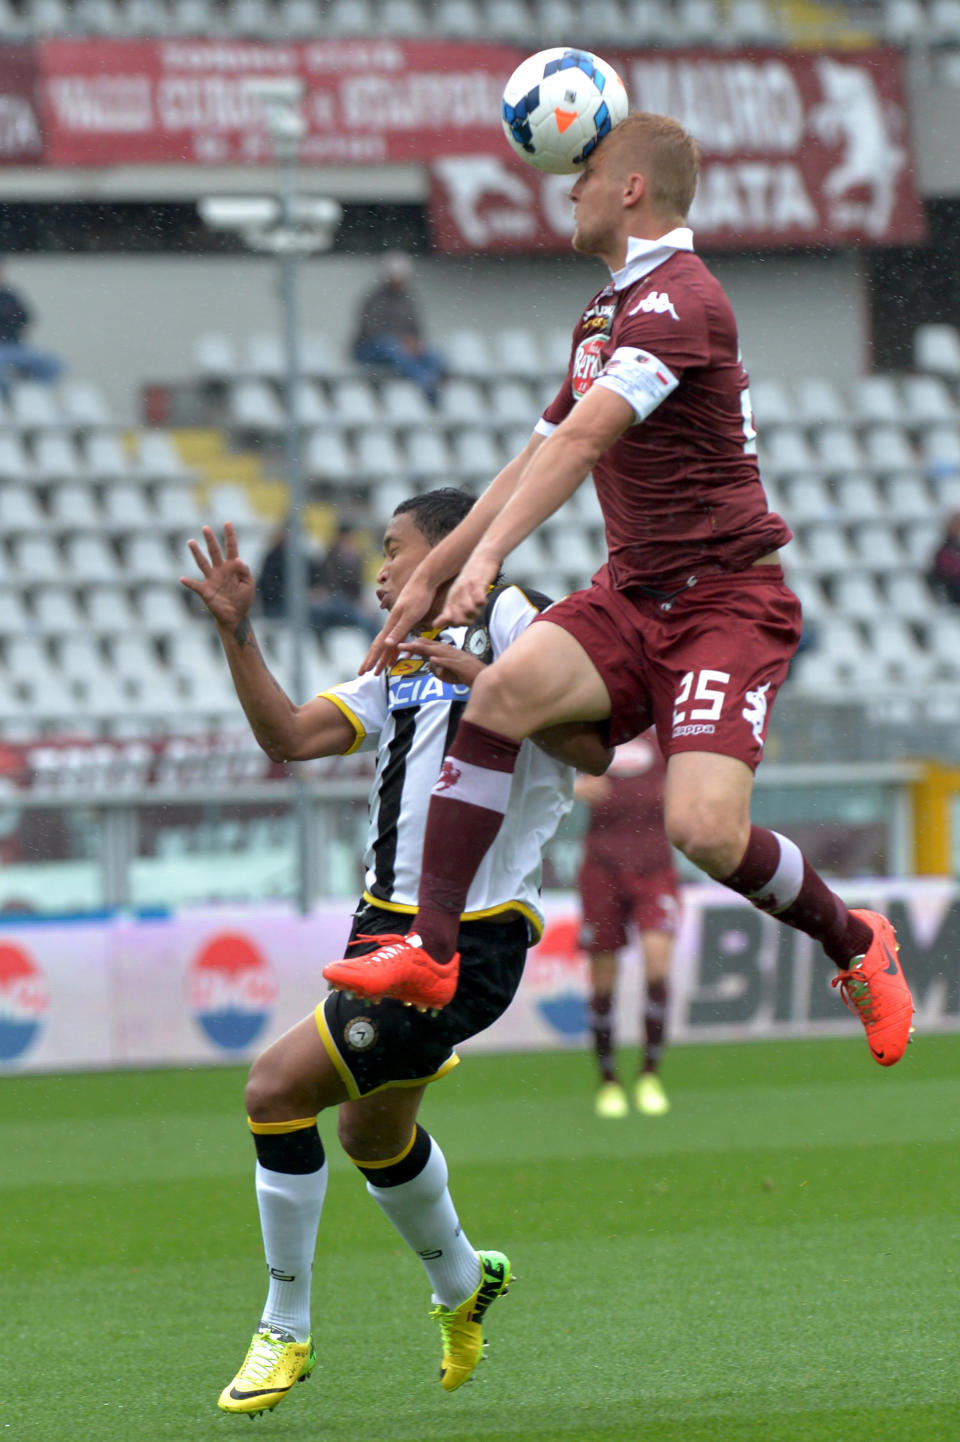 Torino defender Kamil Glik, right, and Udinese forward Luis Muriel vie for the ball during a Serie A soccer match between Torino and Udinese at the Olympic stadium, in Turin, Italy, Sunday, April 27, 2014. (AP Photo/ Massimo Pinca)